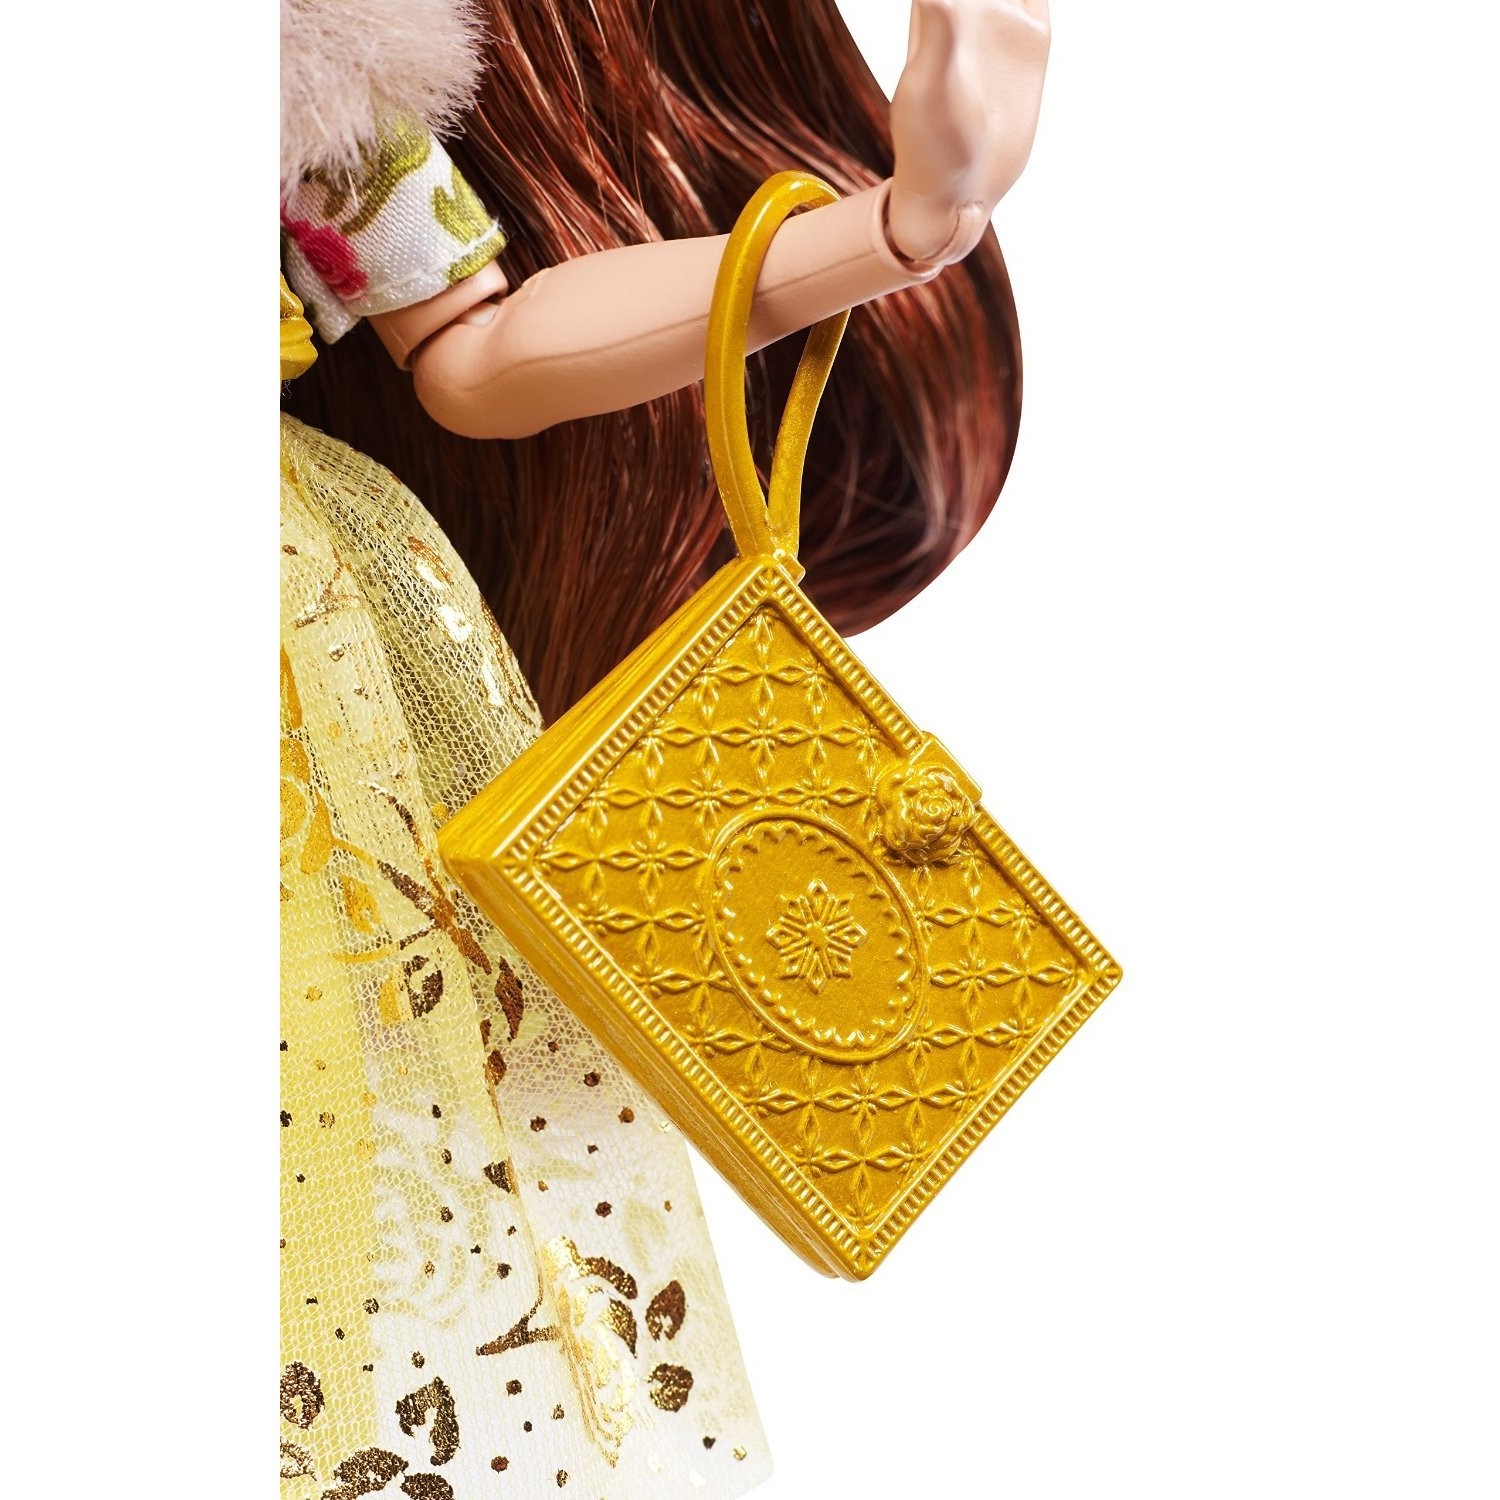 Кукла Ever After High Rosabella Beauty CDH59